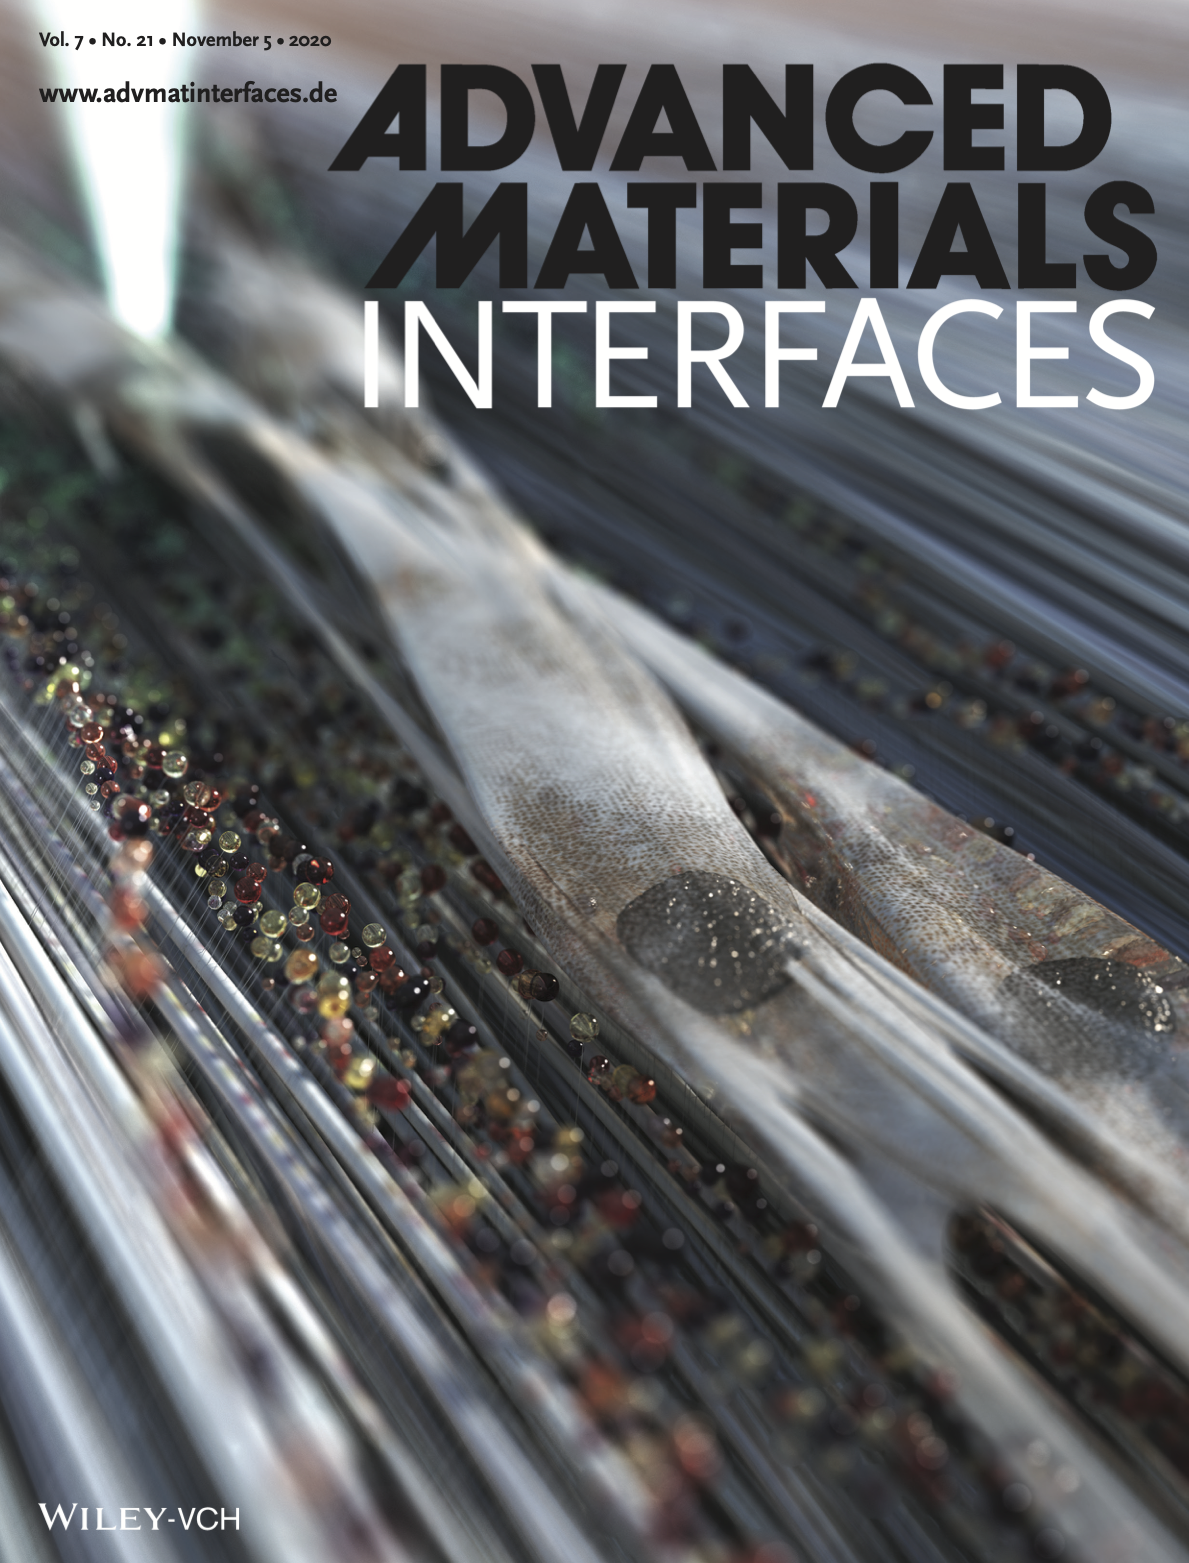 Munoz-Robles 2020 Advanced Materials Interfaces Cover